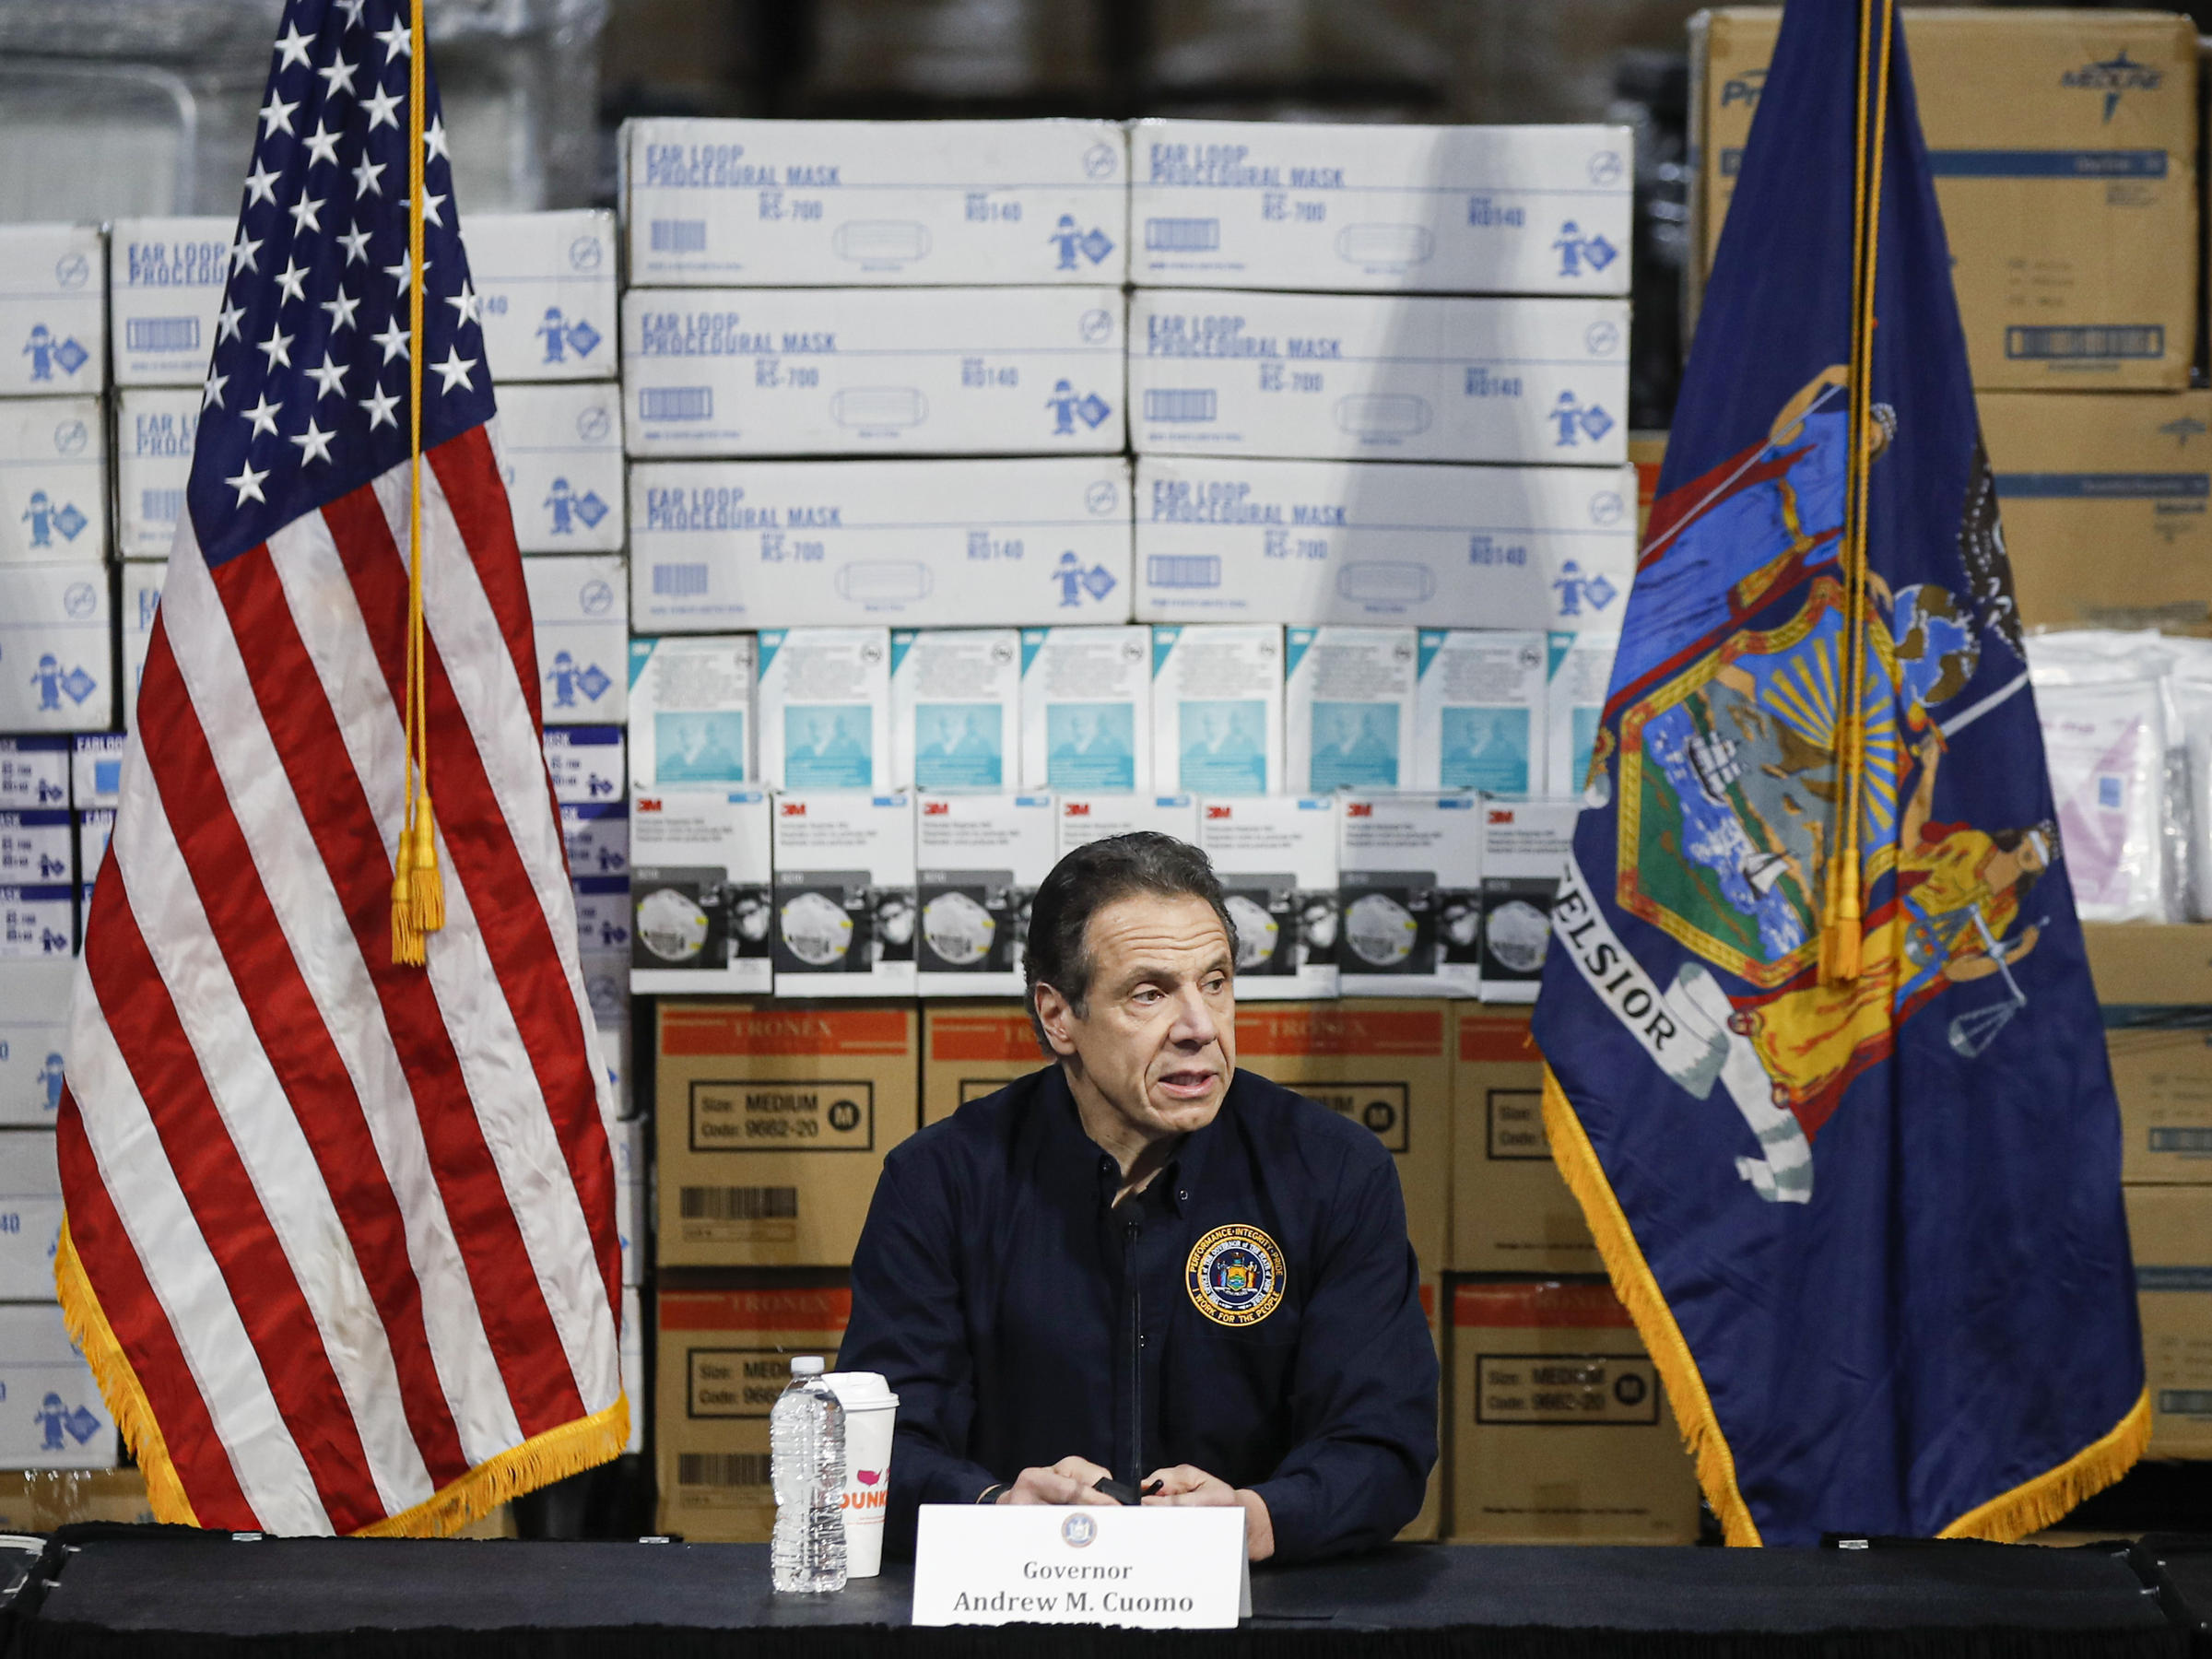 New York Governor Andrew Cuomo gives a status update on coronavirus in his state. New York has the highest number of people who have tested positive to the virus in the US. Net photo